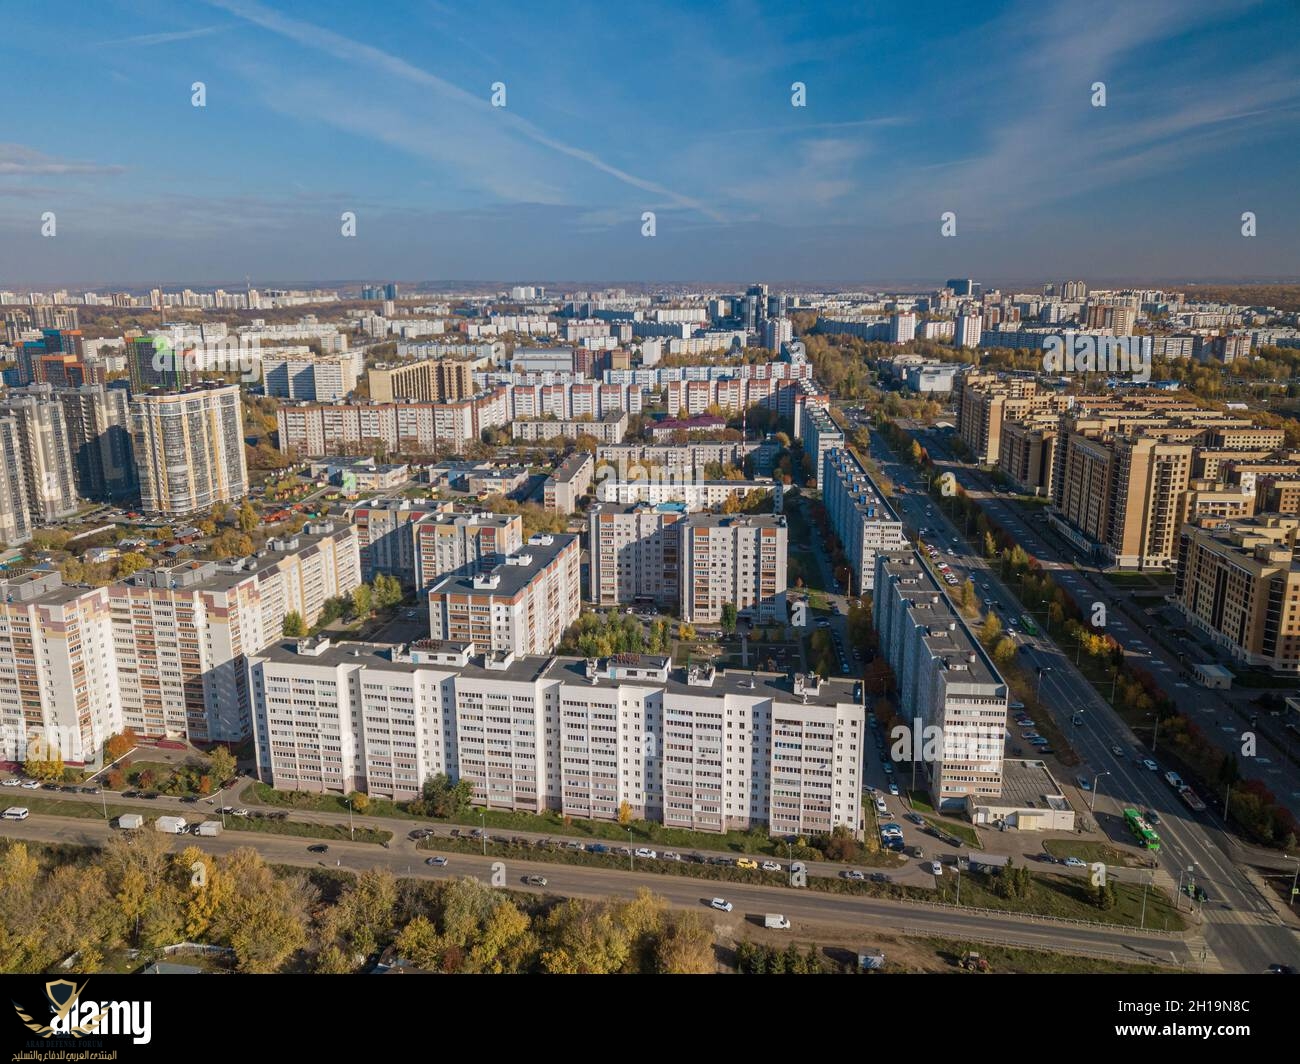 residential-neighborhoods-of-a-russian-city-typical-house-building-residential-areas-with-high...jpg